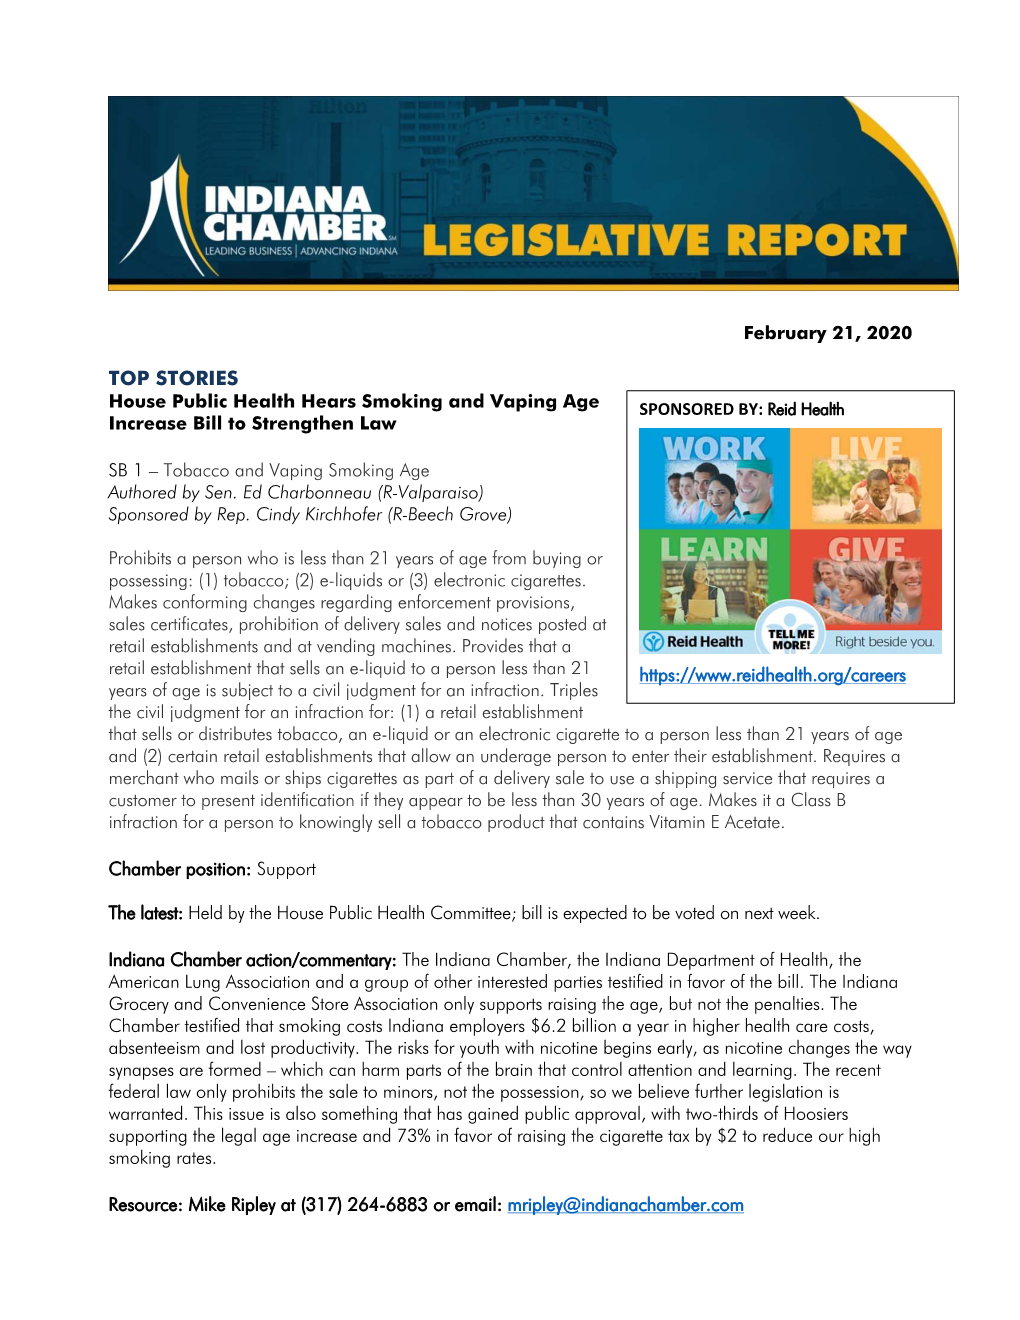 TOP STORIES House Public Health Hears Smoking and Vaping Age SPONSORED BY: Reid Health Increase Bill to Strengthen Law